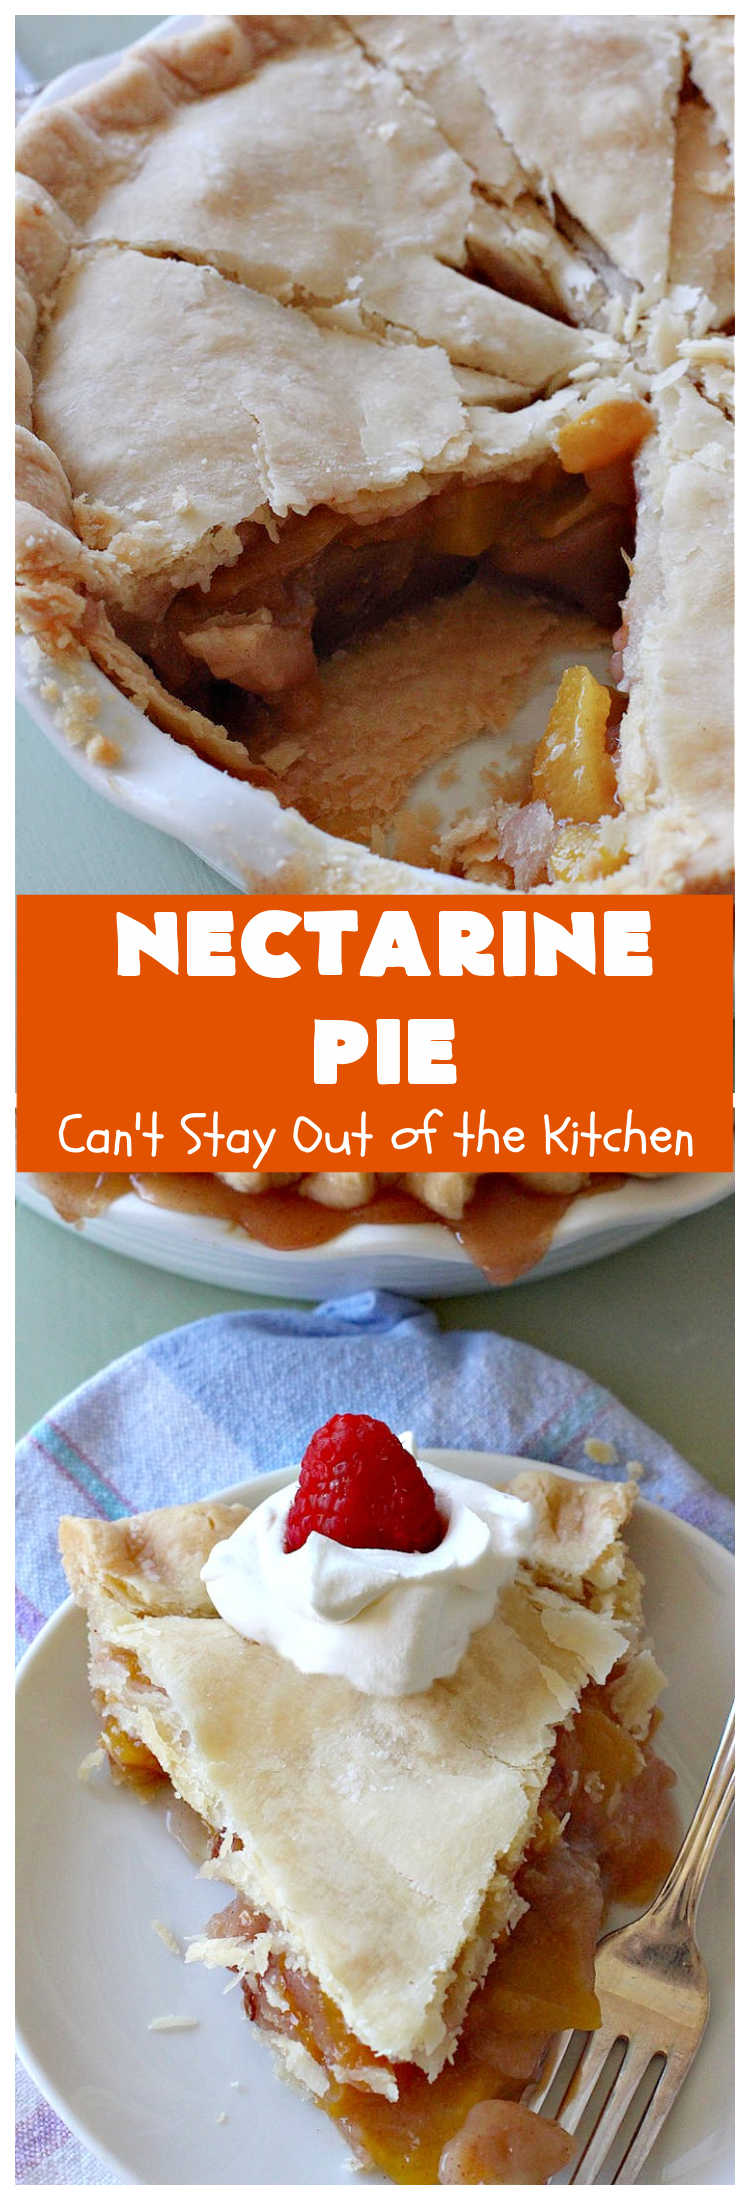 Nectarine Pie | Can't Stay Out of the Kitchen | this is absolutely the best  #FruitPie ever! I never realized #nectarines tasted so great in #dessert. Better than #PeachPie! Love this #recipe. #southern #NectarinePie #cinnamon #NectarineDessert #Canbassador #WashingtonStateFruitCommission #WashingtonStoneFruitGrowers